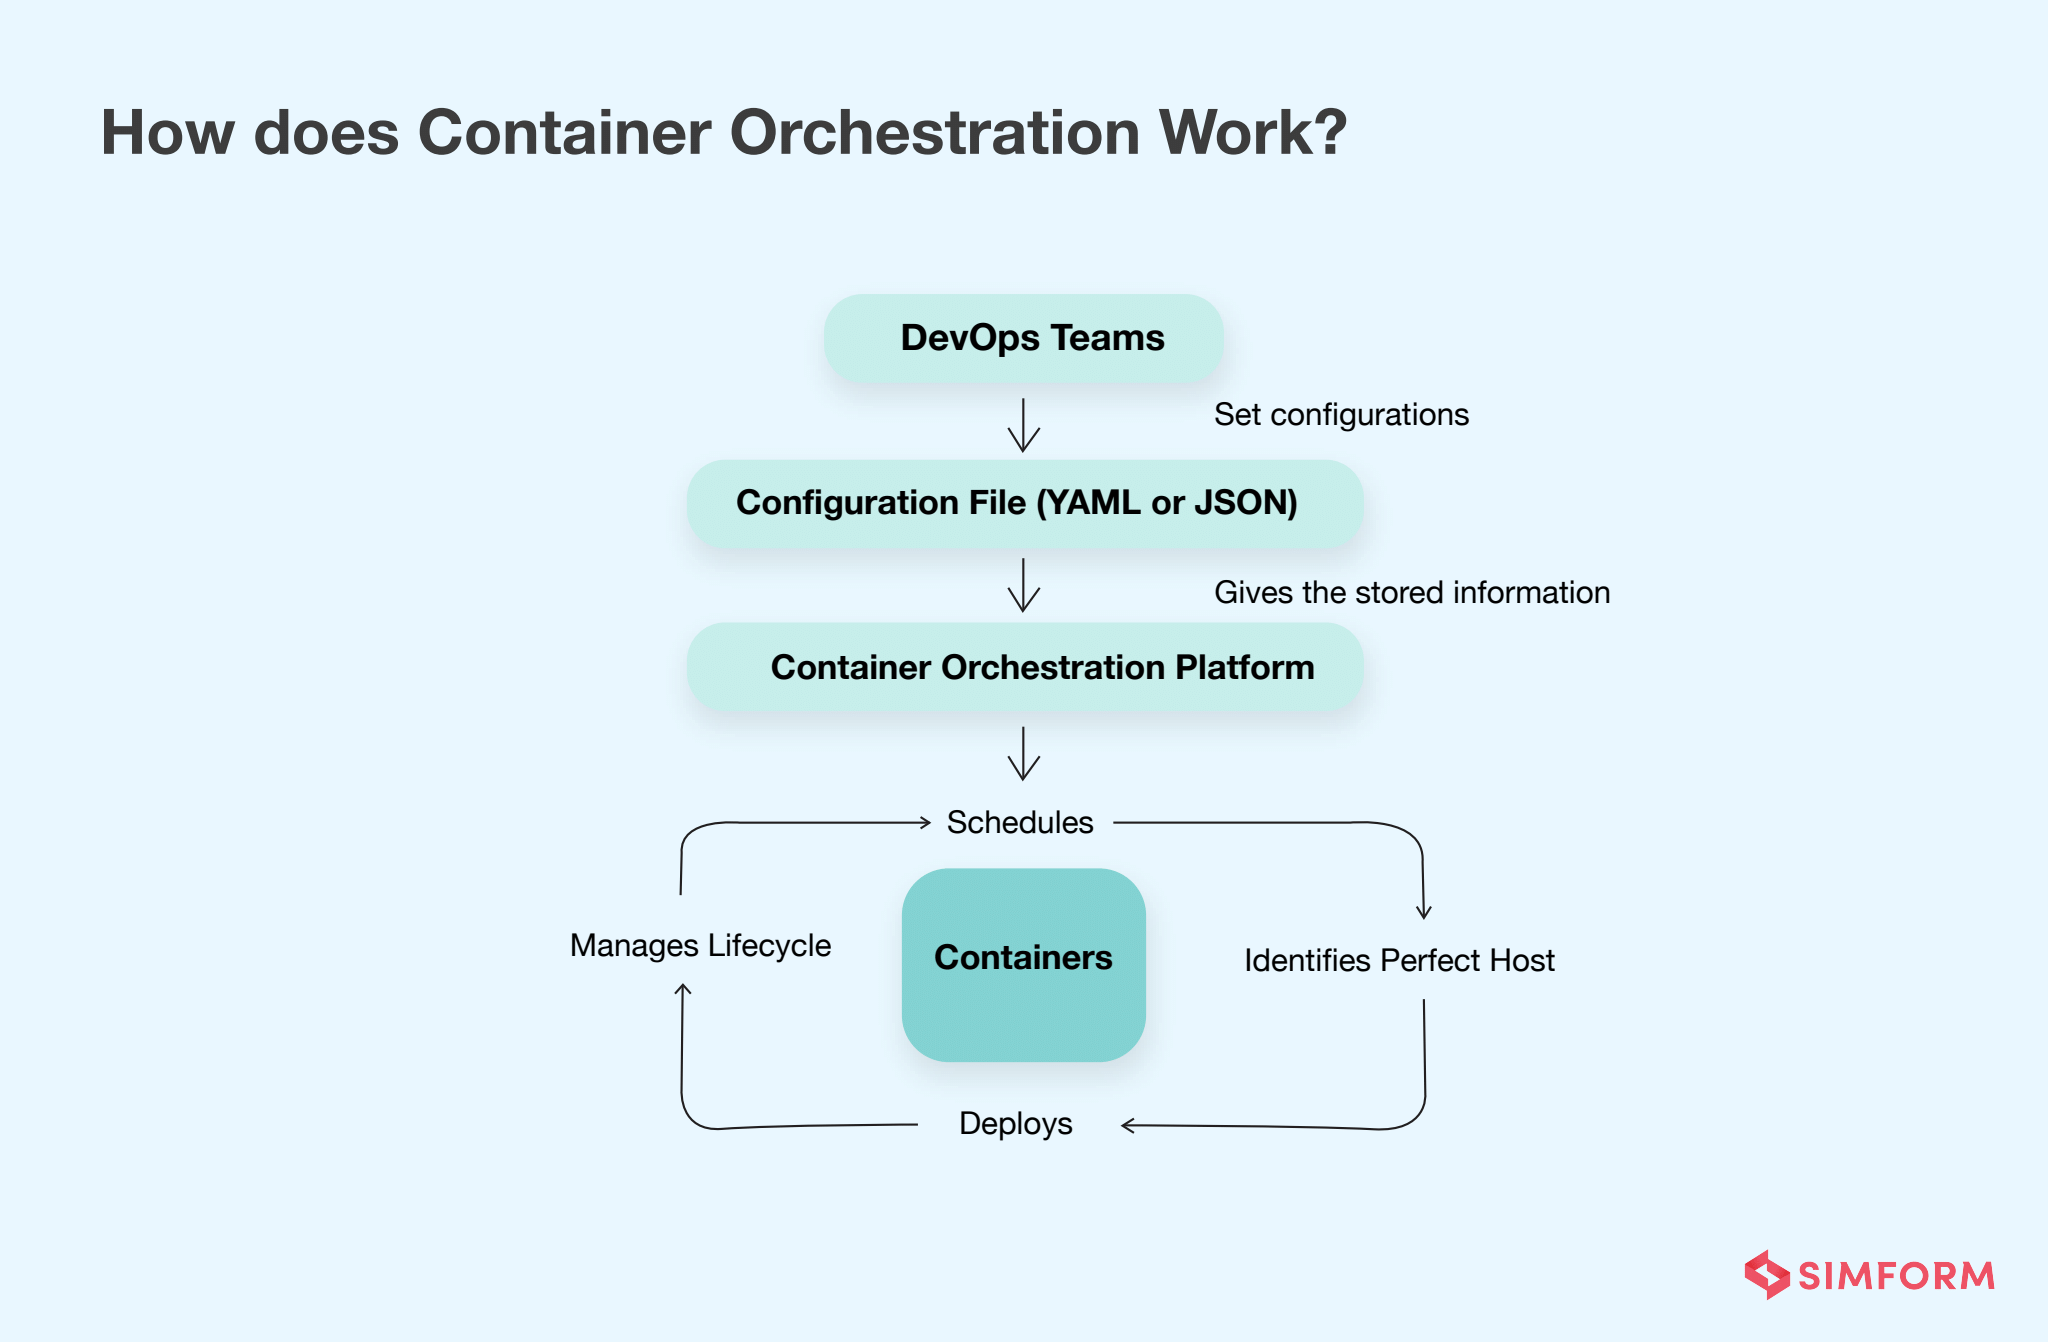 How Container Orchestration Works